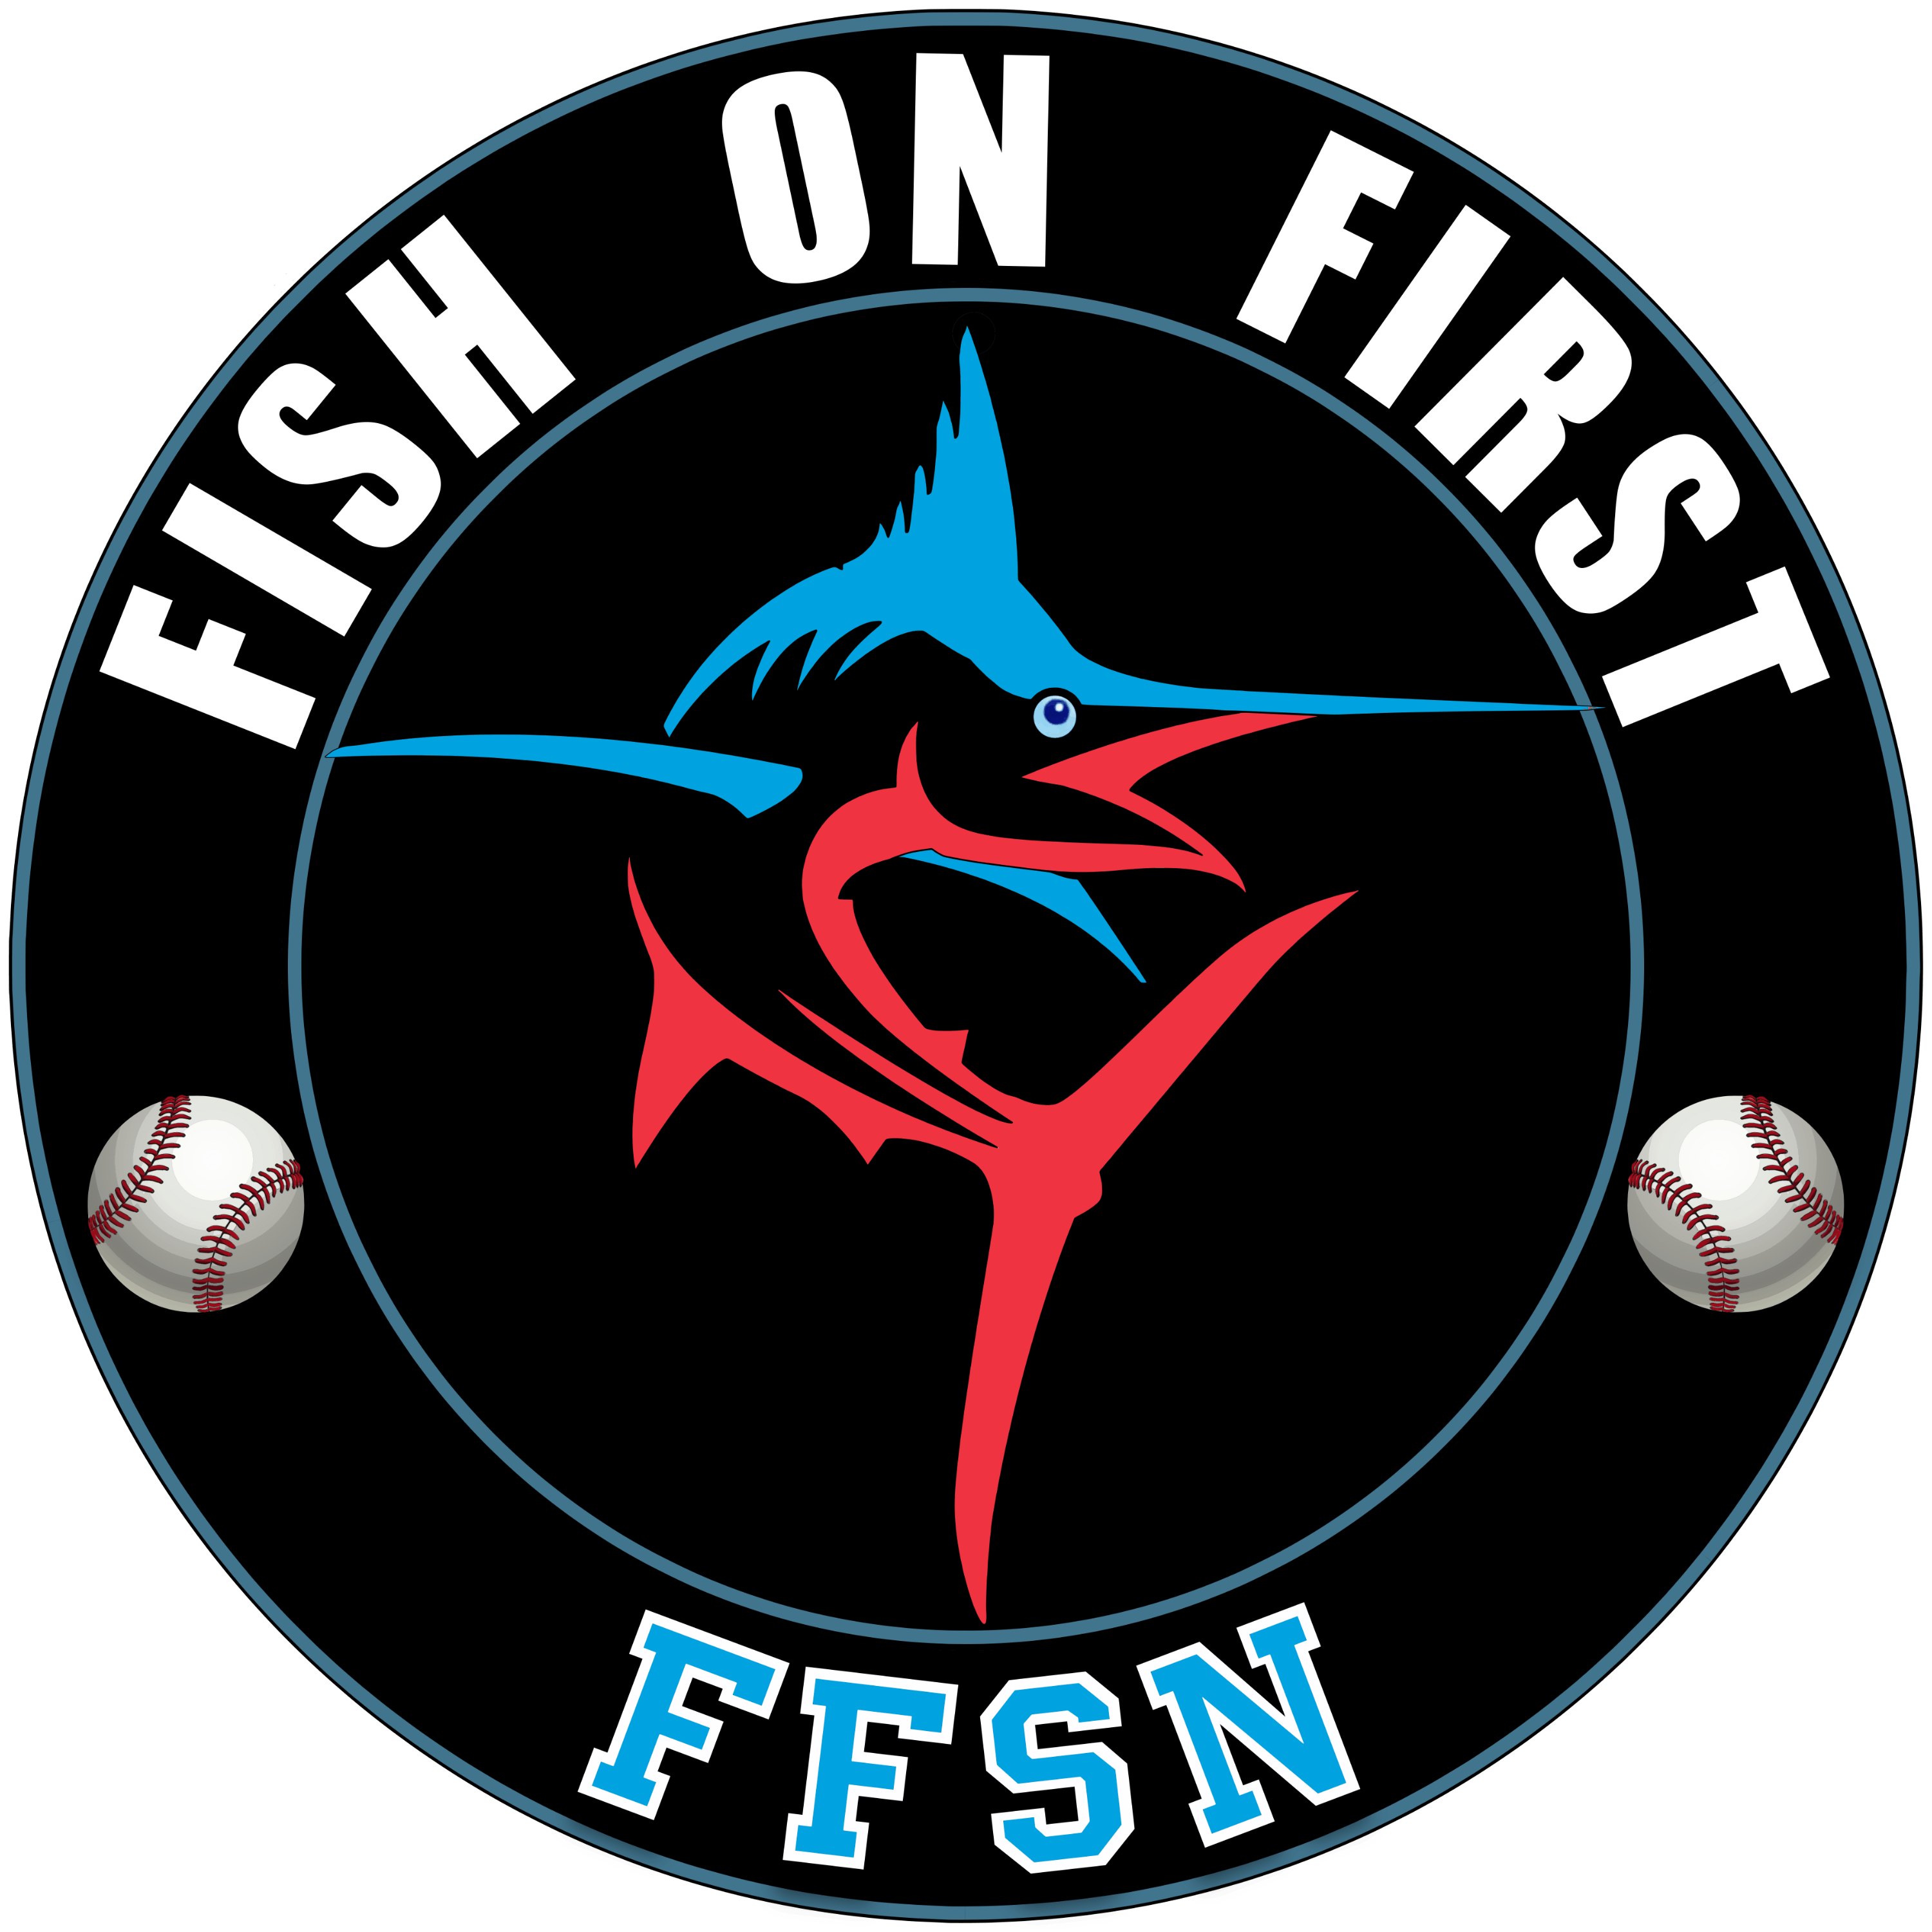 The Offishial Show: Segura Signing Looking Like a Bust